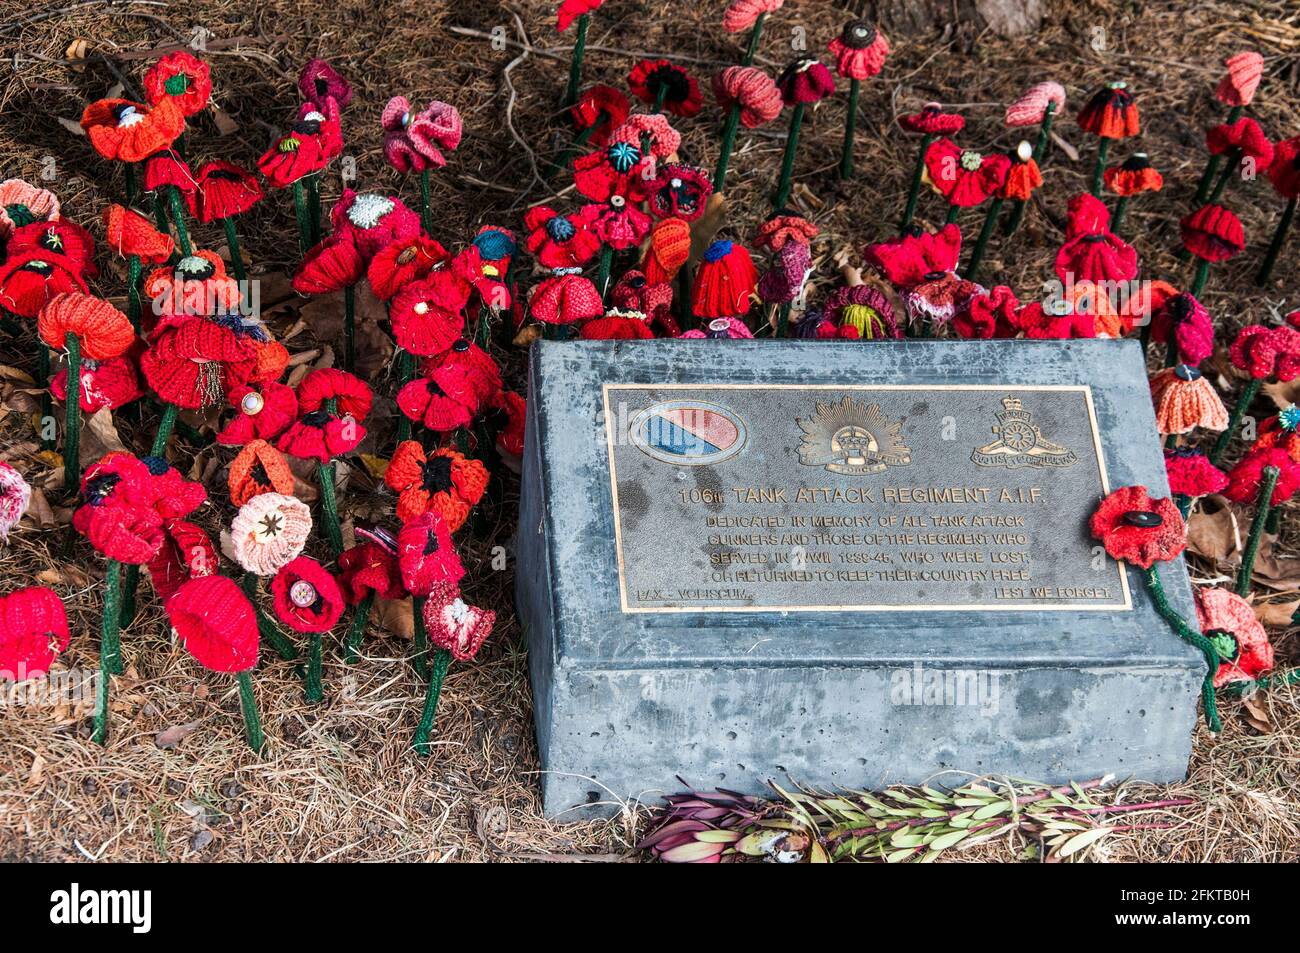 War memorial plaque placed on the Kings Domain to honour 106th Tank Attack Regiment A.I.F., together with knitted poppies, Melbourne, Australia Stock Photo